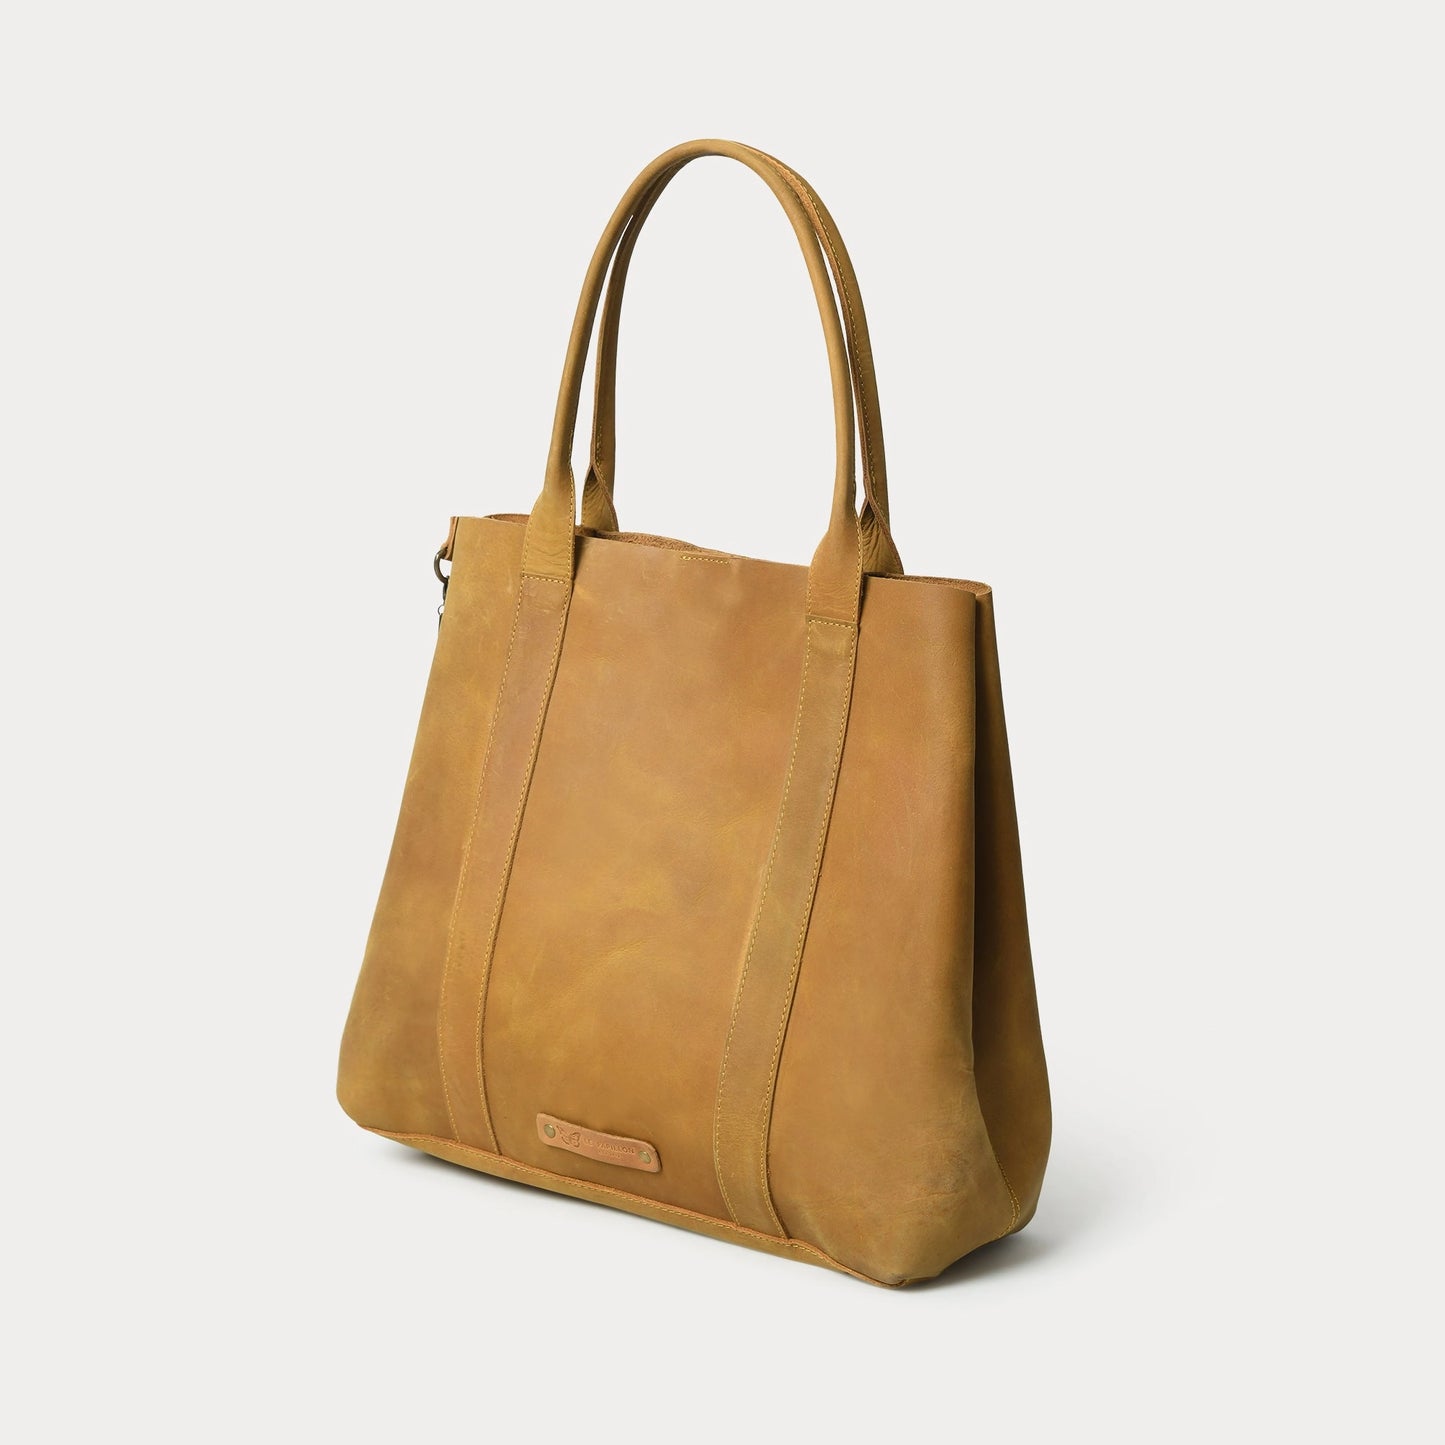 Save 40%! - Shinny Leather Tote in Light Brown by Le Papillon